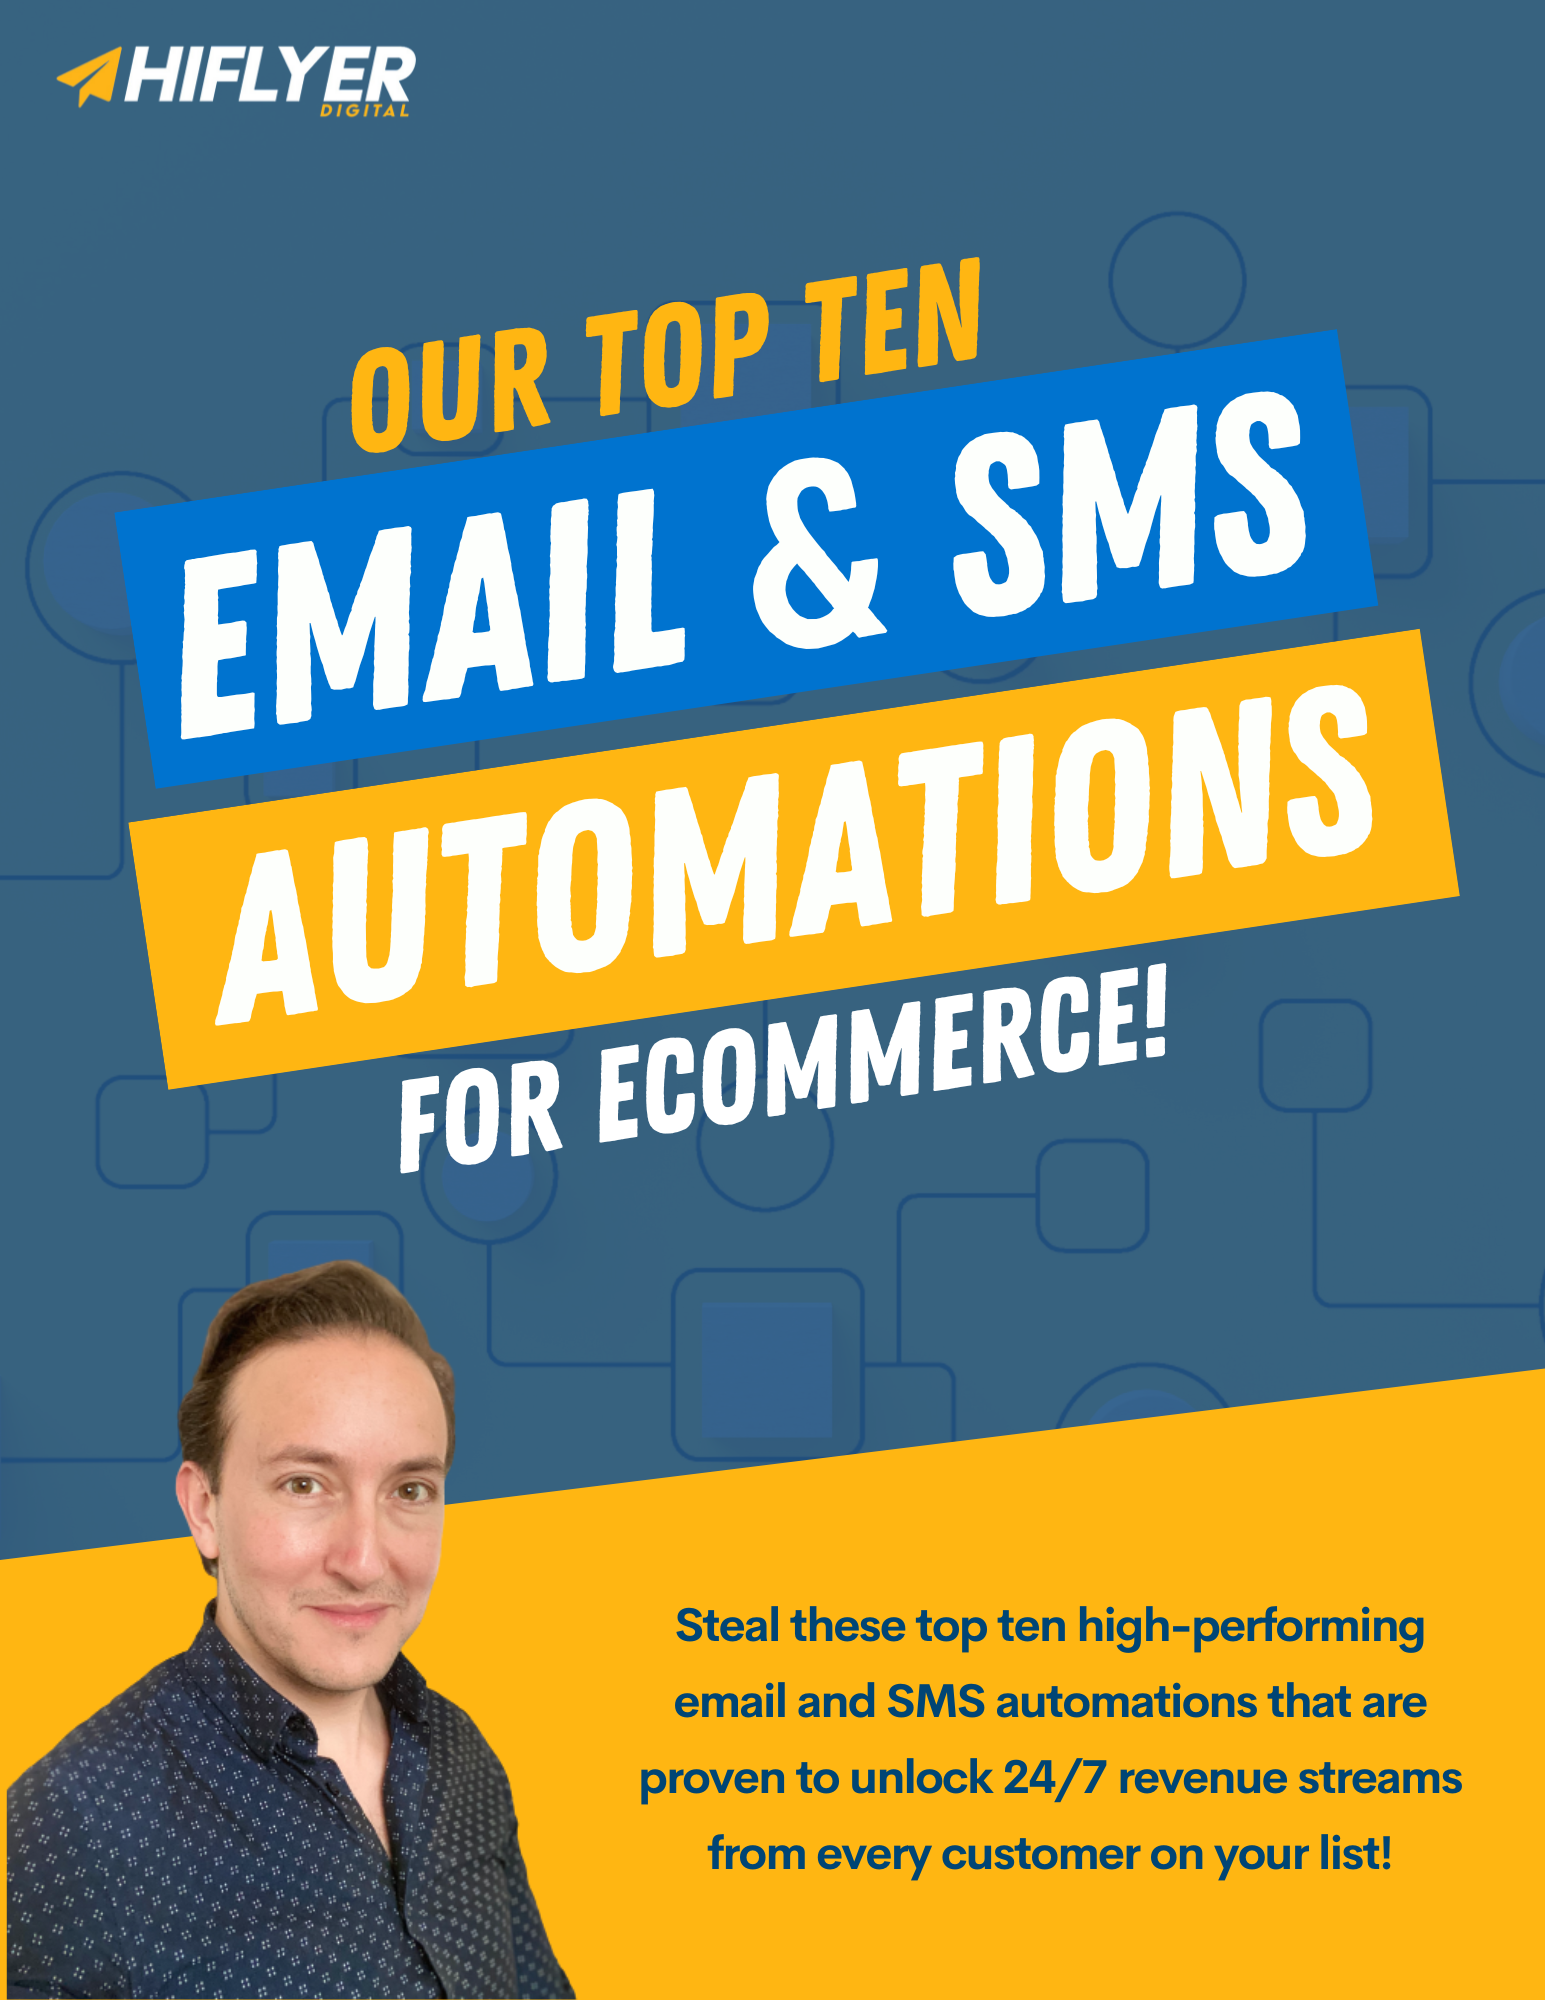 Top 10 Email Marketing Automations for Ecommerce | HiFlyer Digital